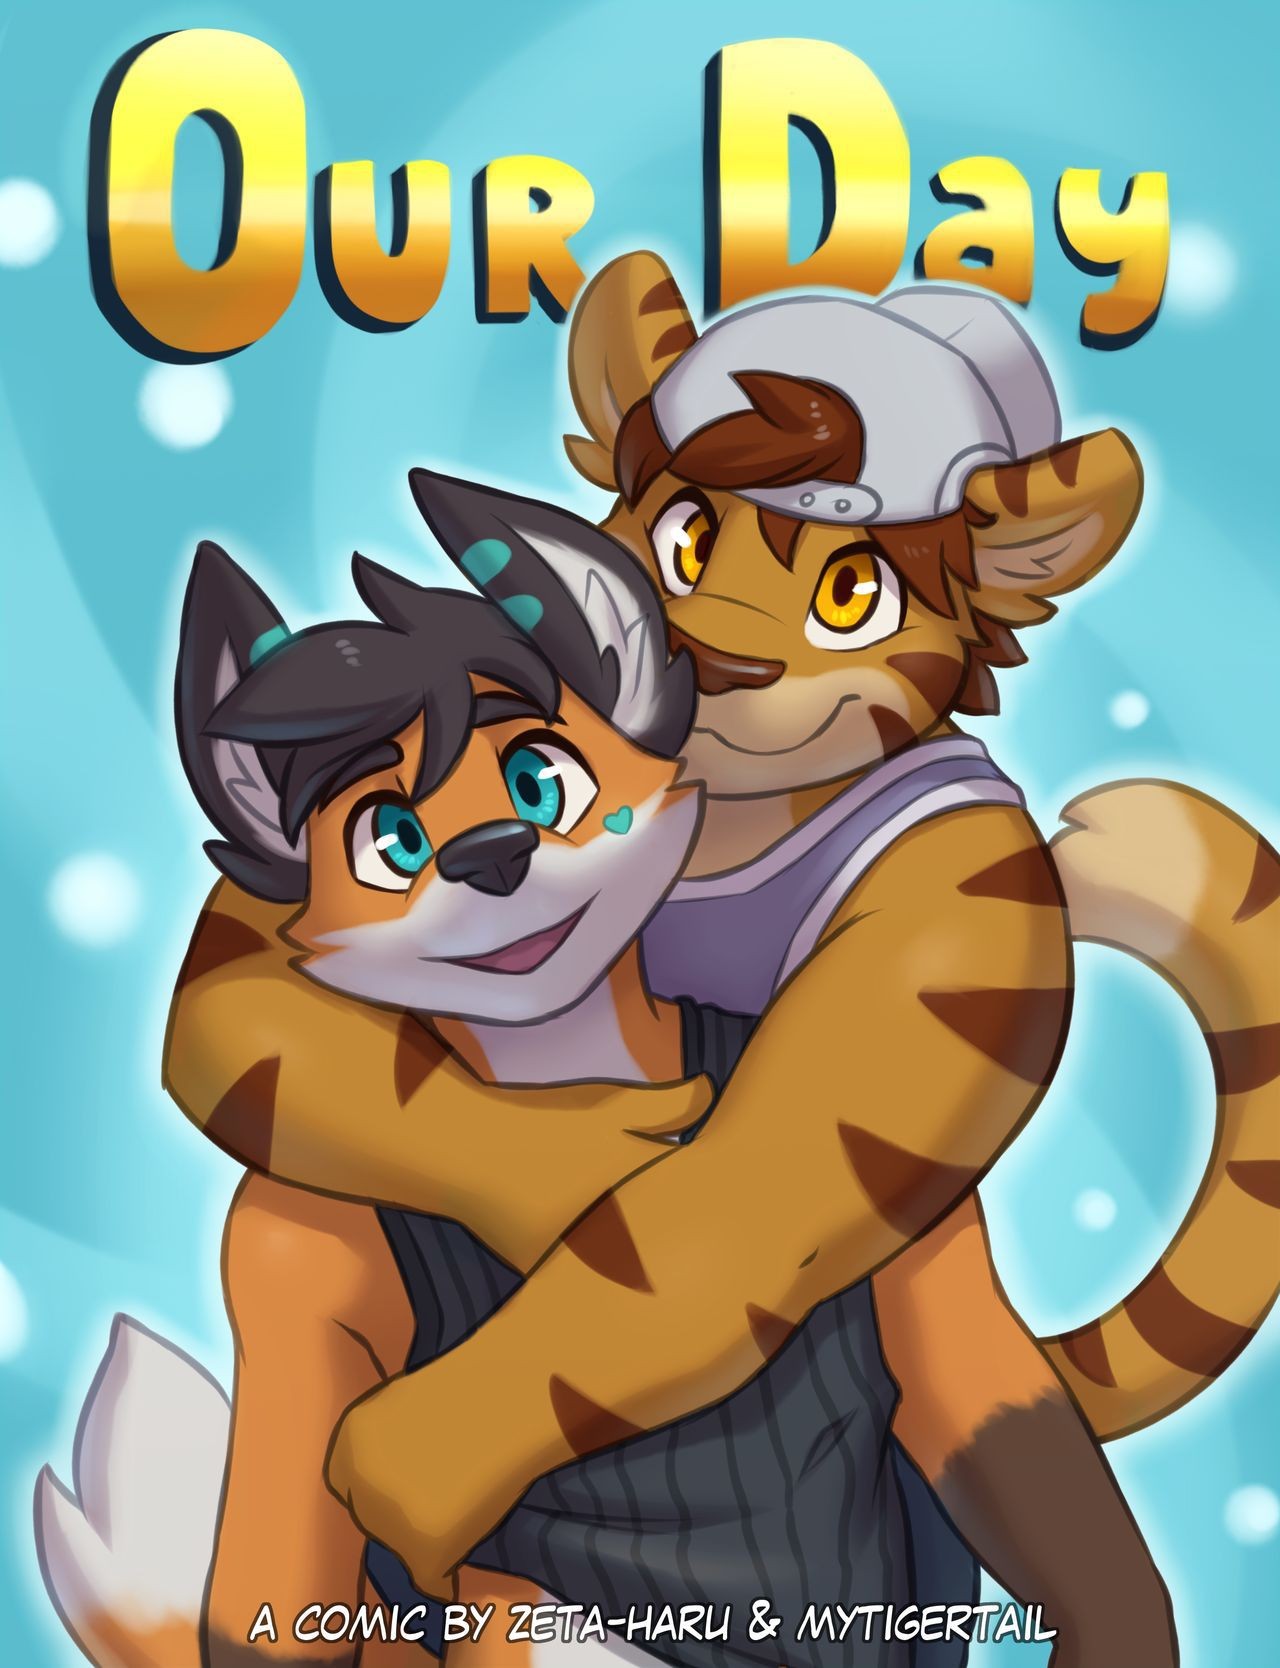 Unshaved [Zeta-Haru & Mytigertail] Our Day (Complete) Dominate